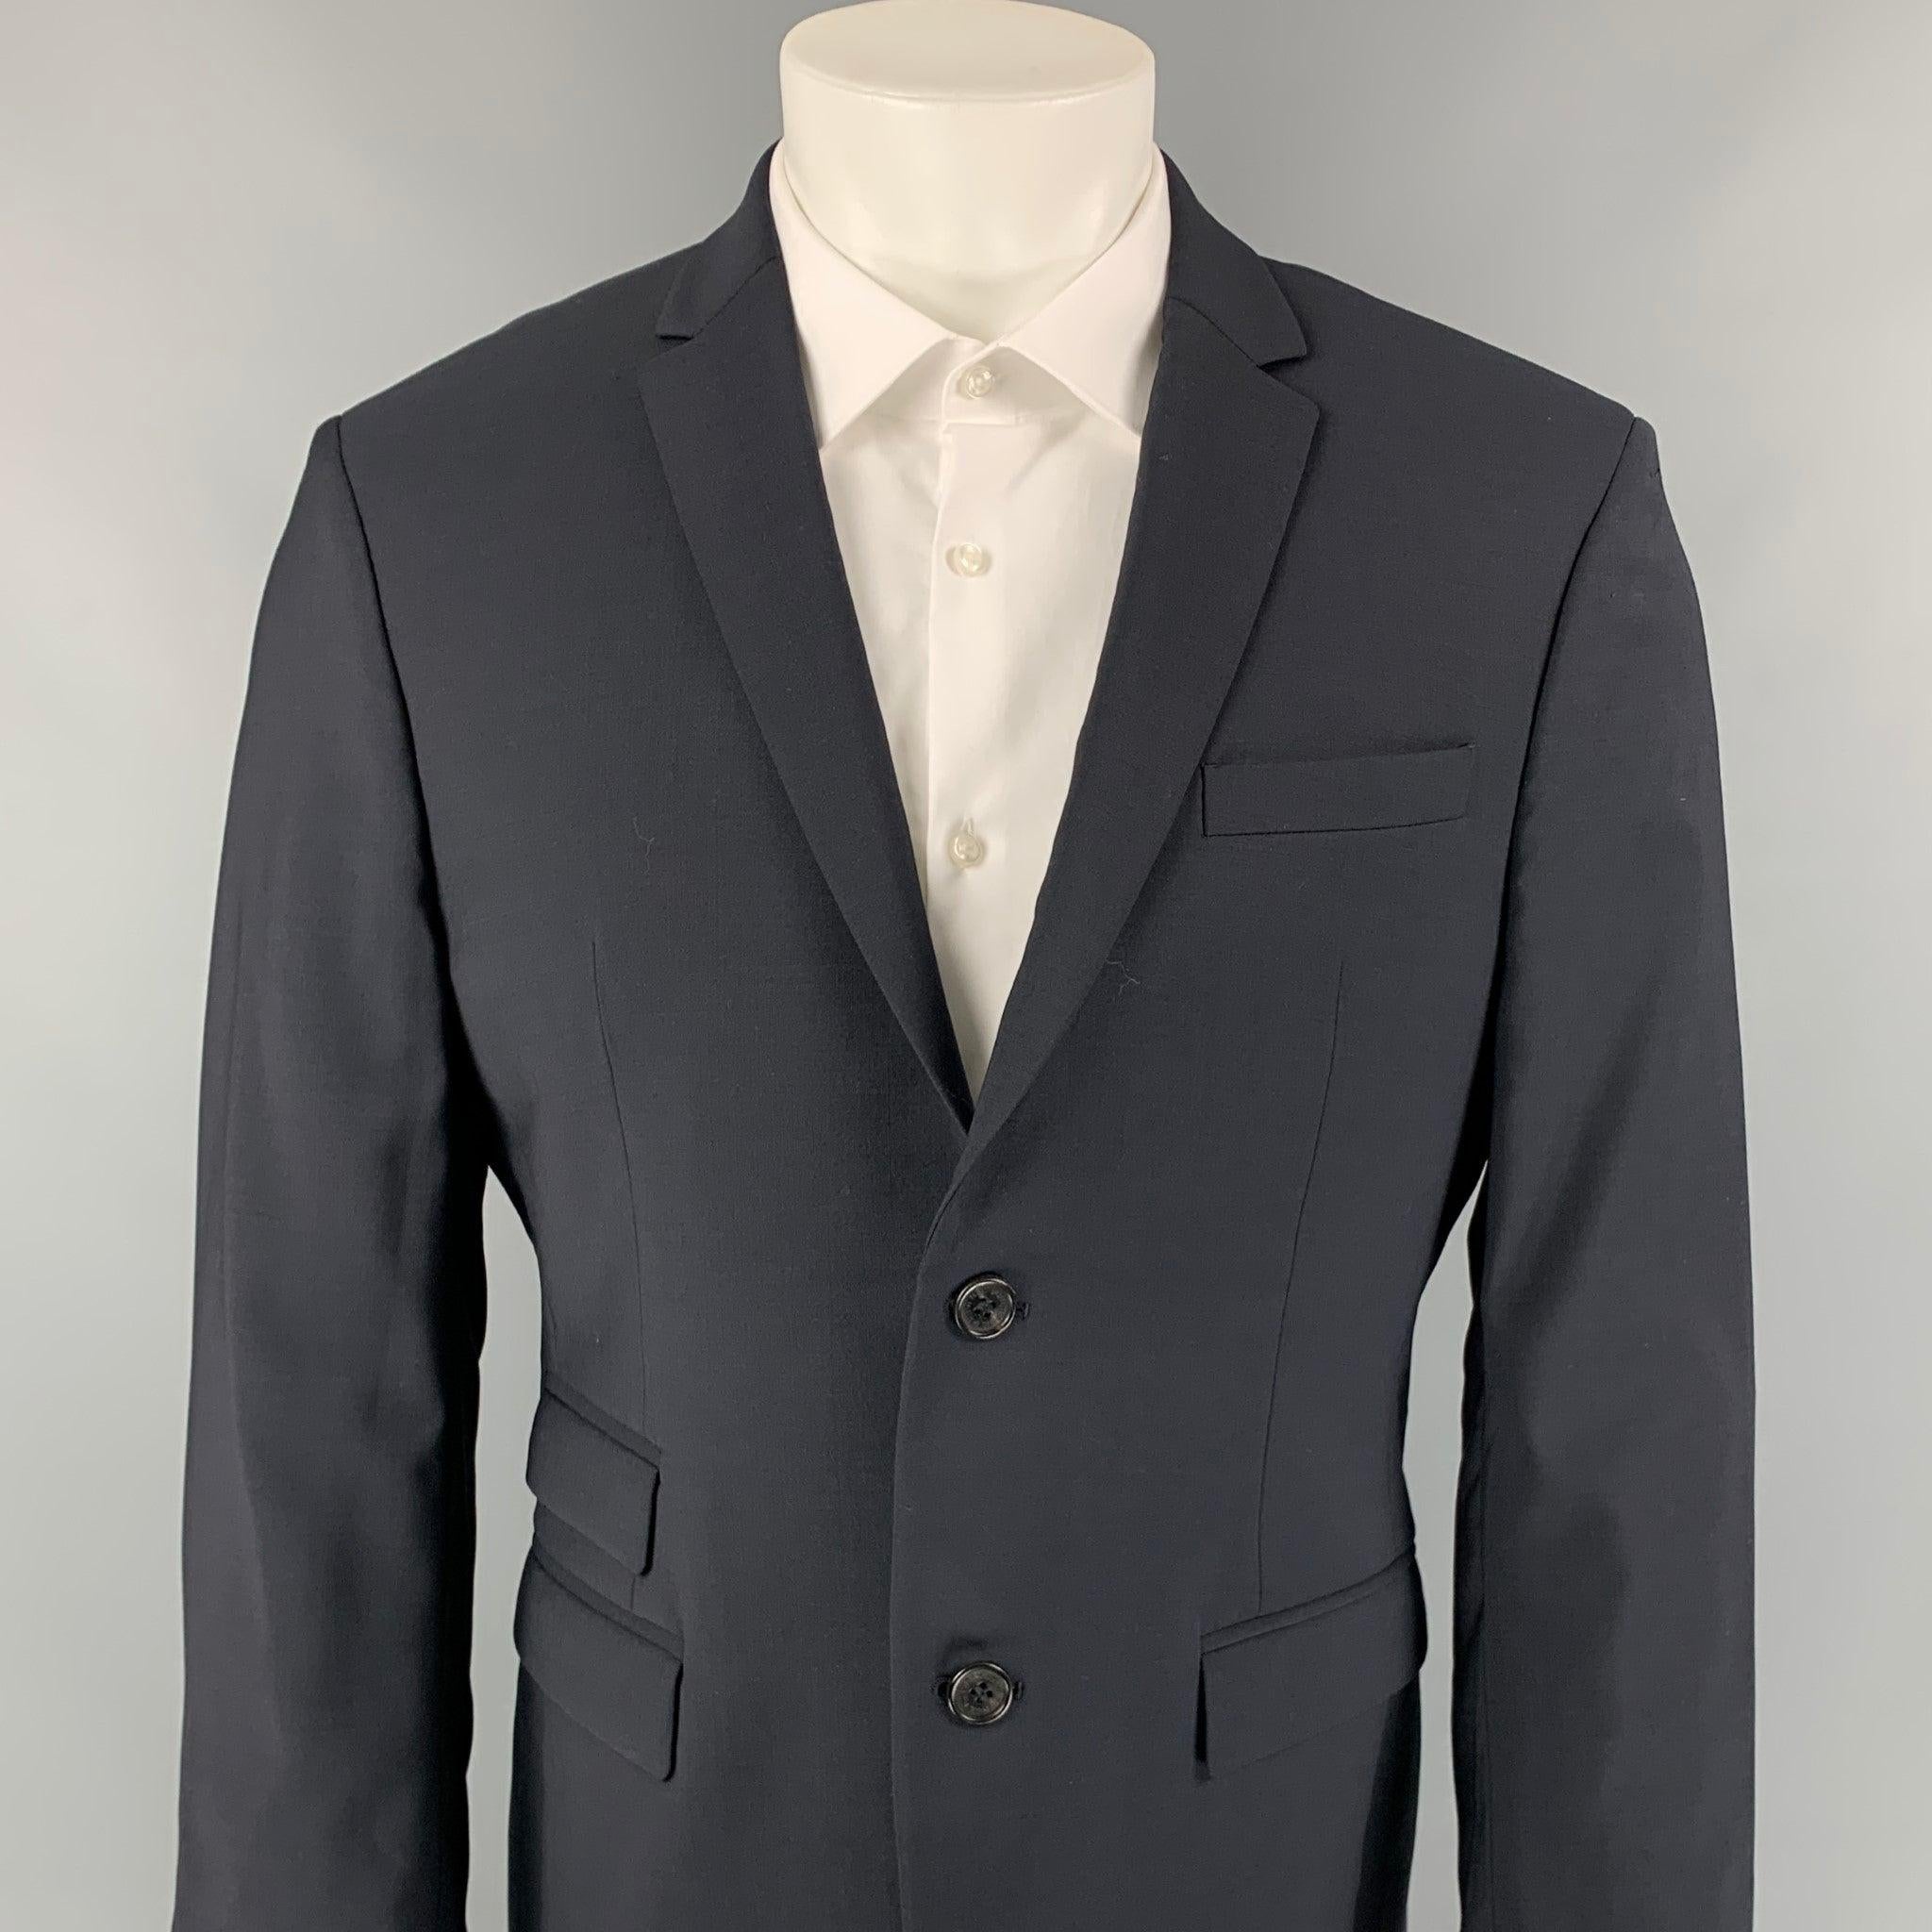 NEIL BARRETT sport coat comes in a navy wool with a full liner featuring a slim fit, notch lapel, double back vent, flap pockets, and a double button closure. Made in Italy.
Very Good Pre-Owned Condition. 

Marked:   50 

Measurements: 
 
Shoulder: